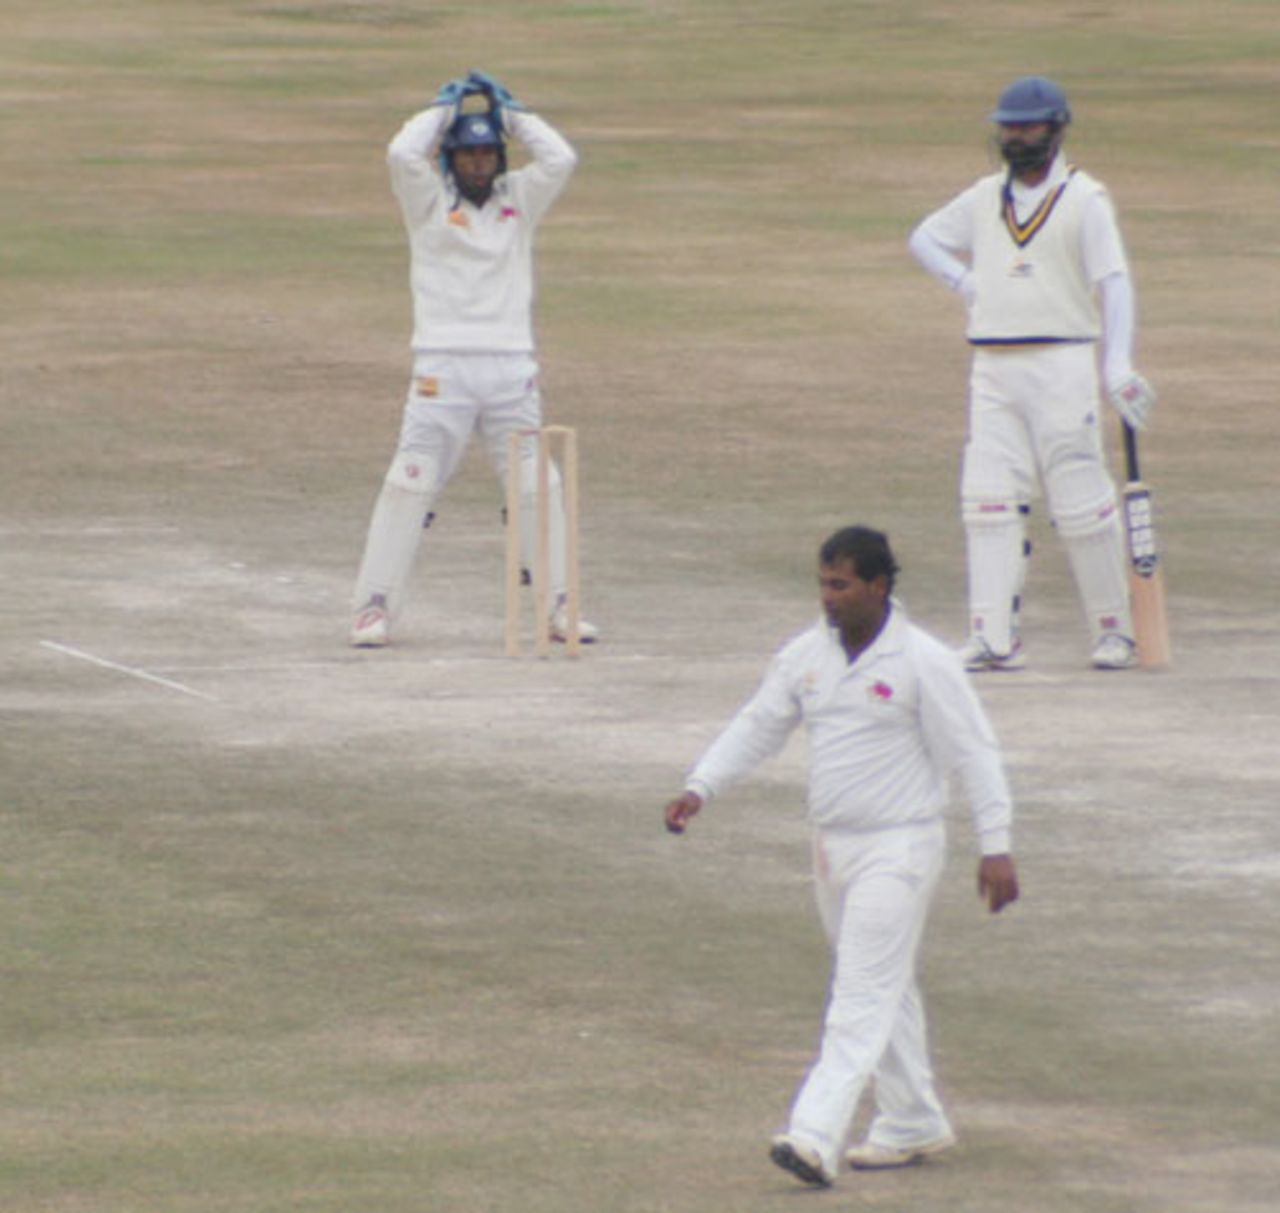 Ramesh Powar is dejected after his appeal was turned down, Himachal Pradesh v Mumbai, Ranji Trophy Super League, Group A, 6th round, Dharamsala, 2nd day, December 18, 2007 